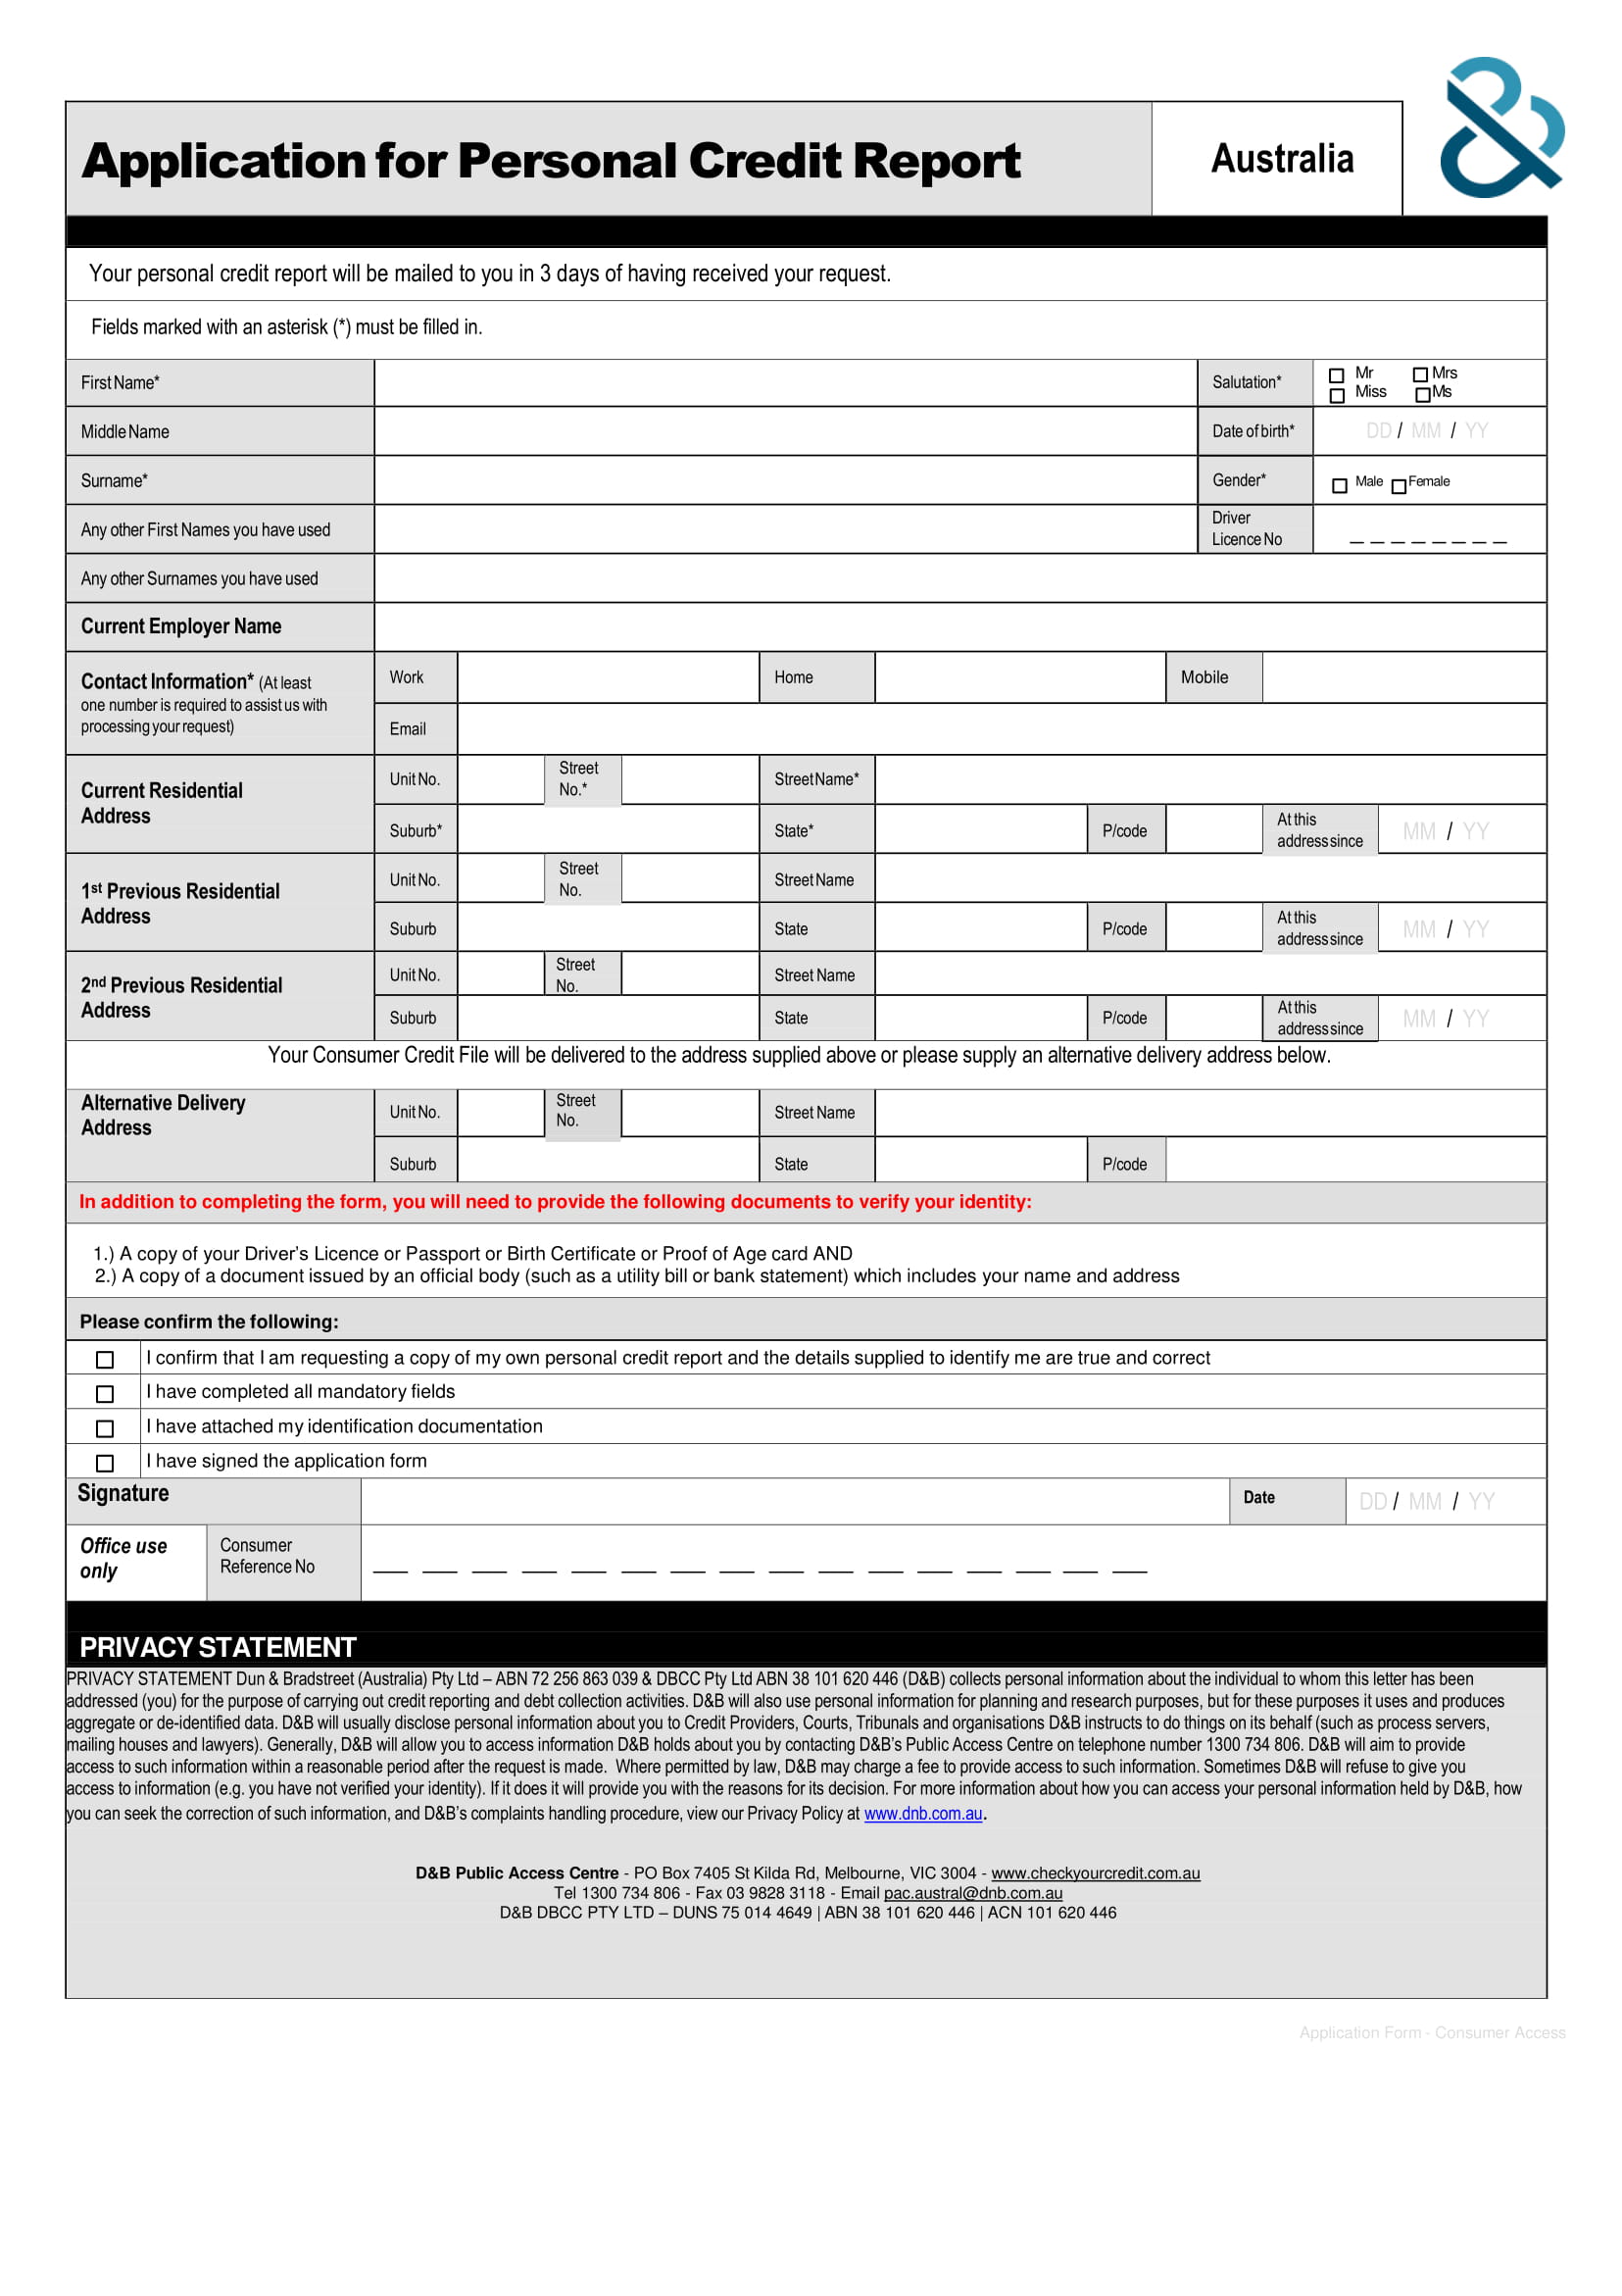 FREE 13+ Credit Report Forms in PDF | MS Word